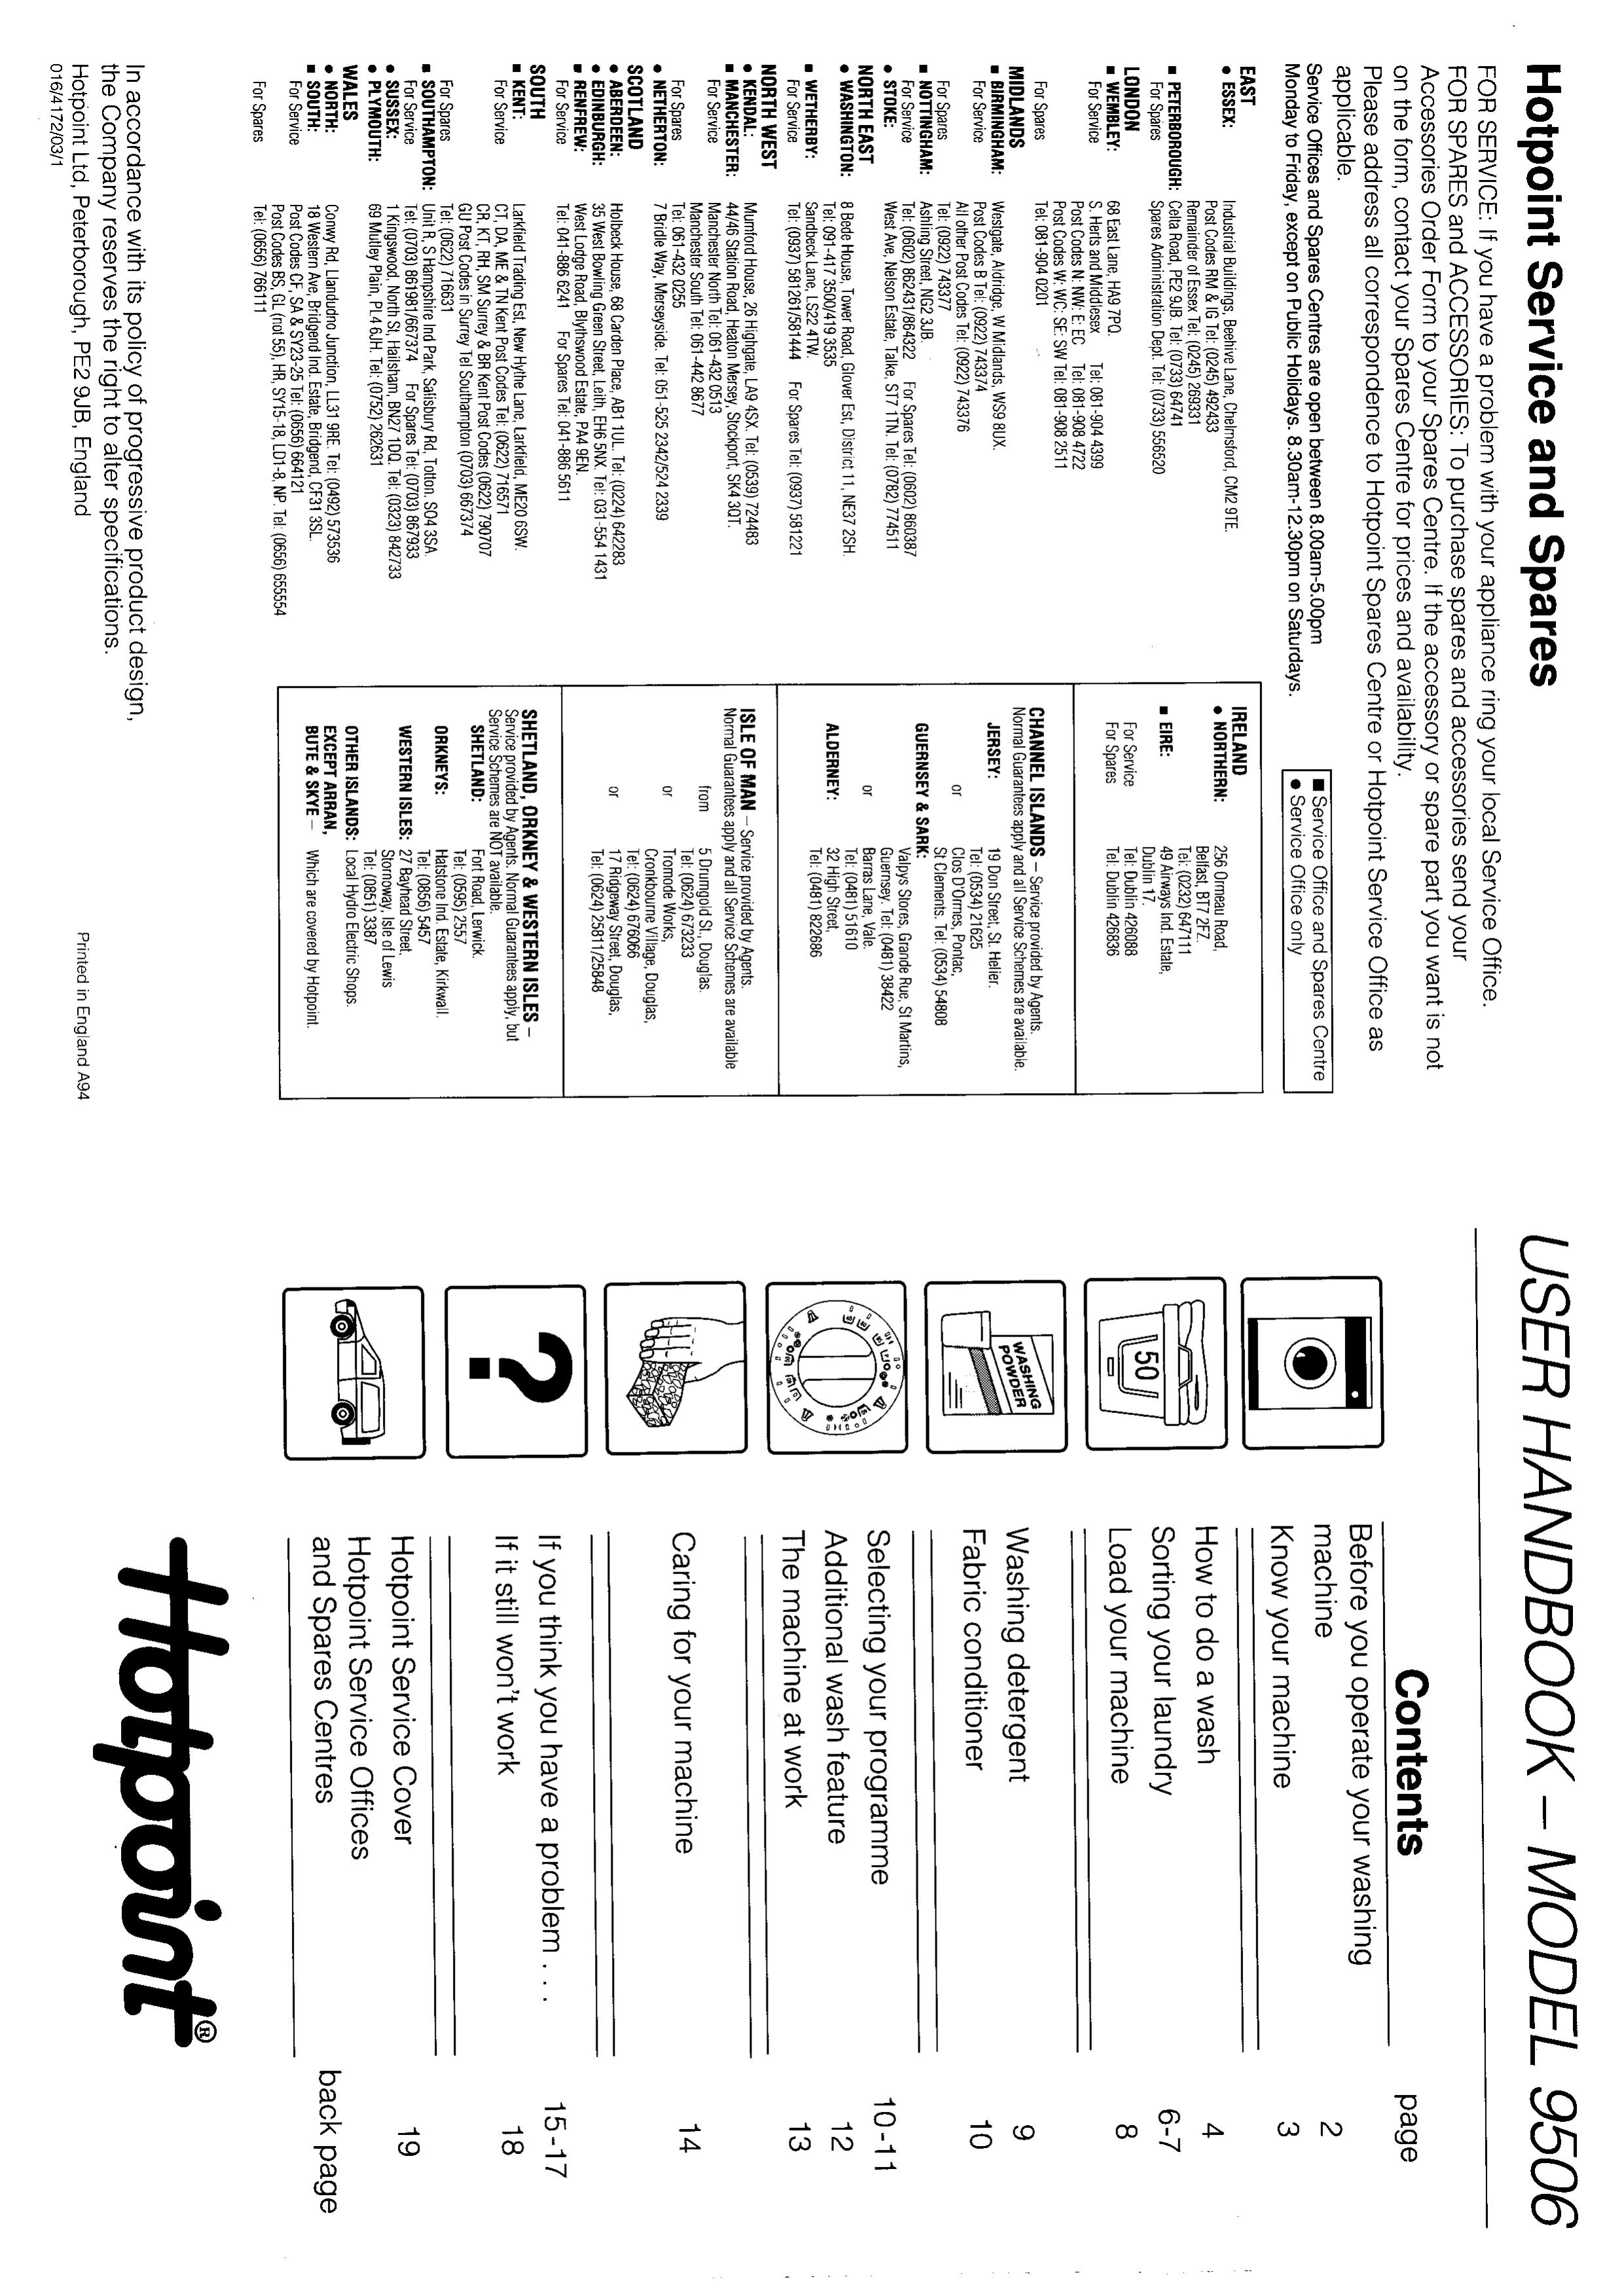 Hotpoint 9506 Washer User Manual